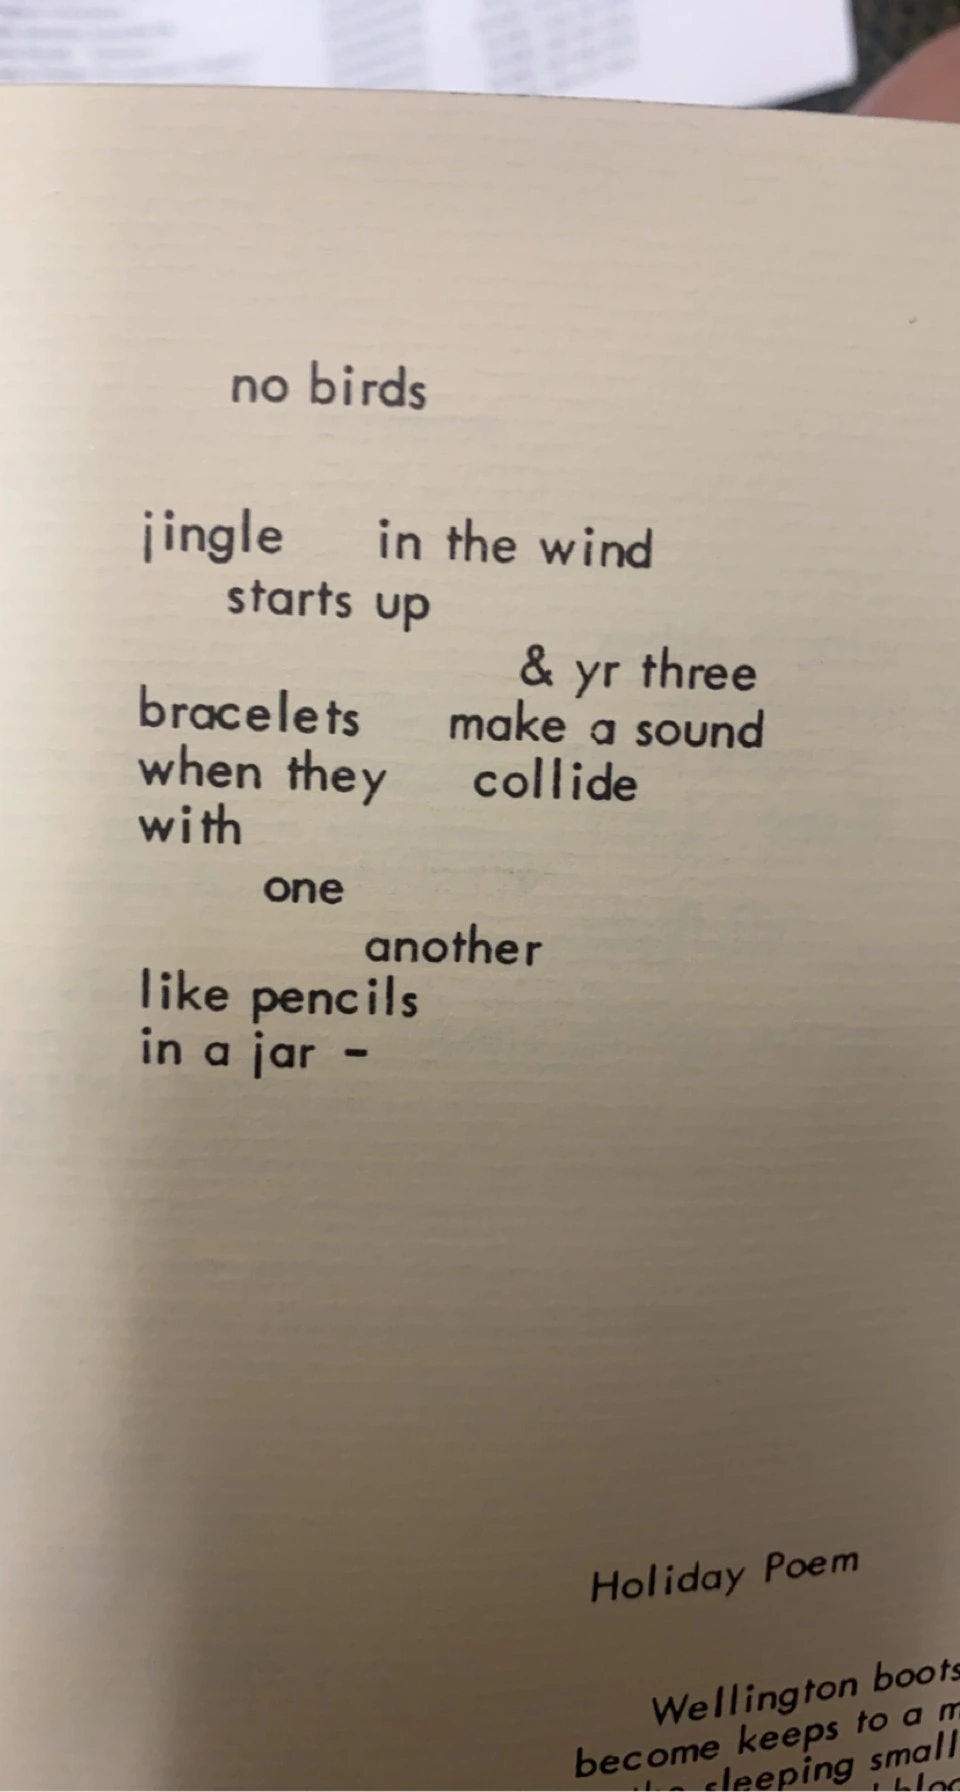 The poem "no birds" in the book Love Poems